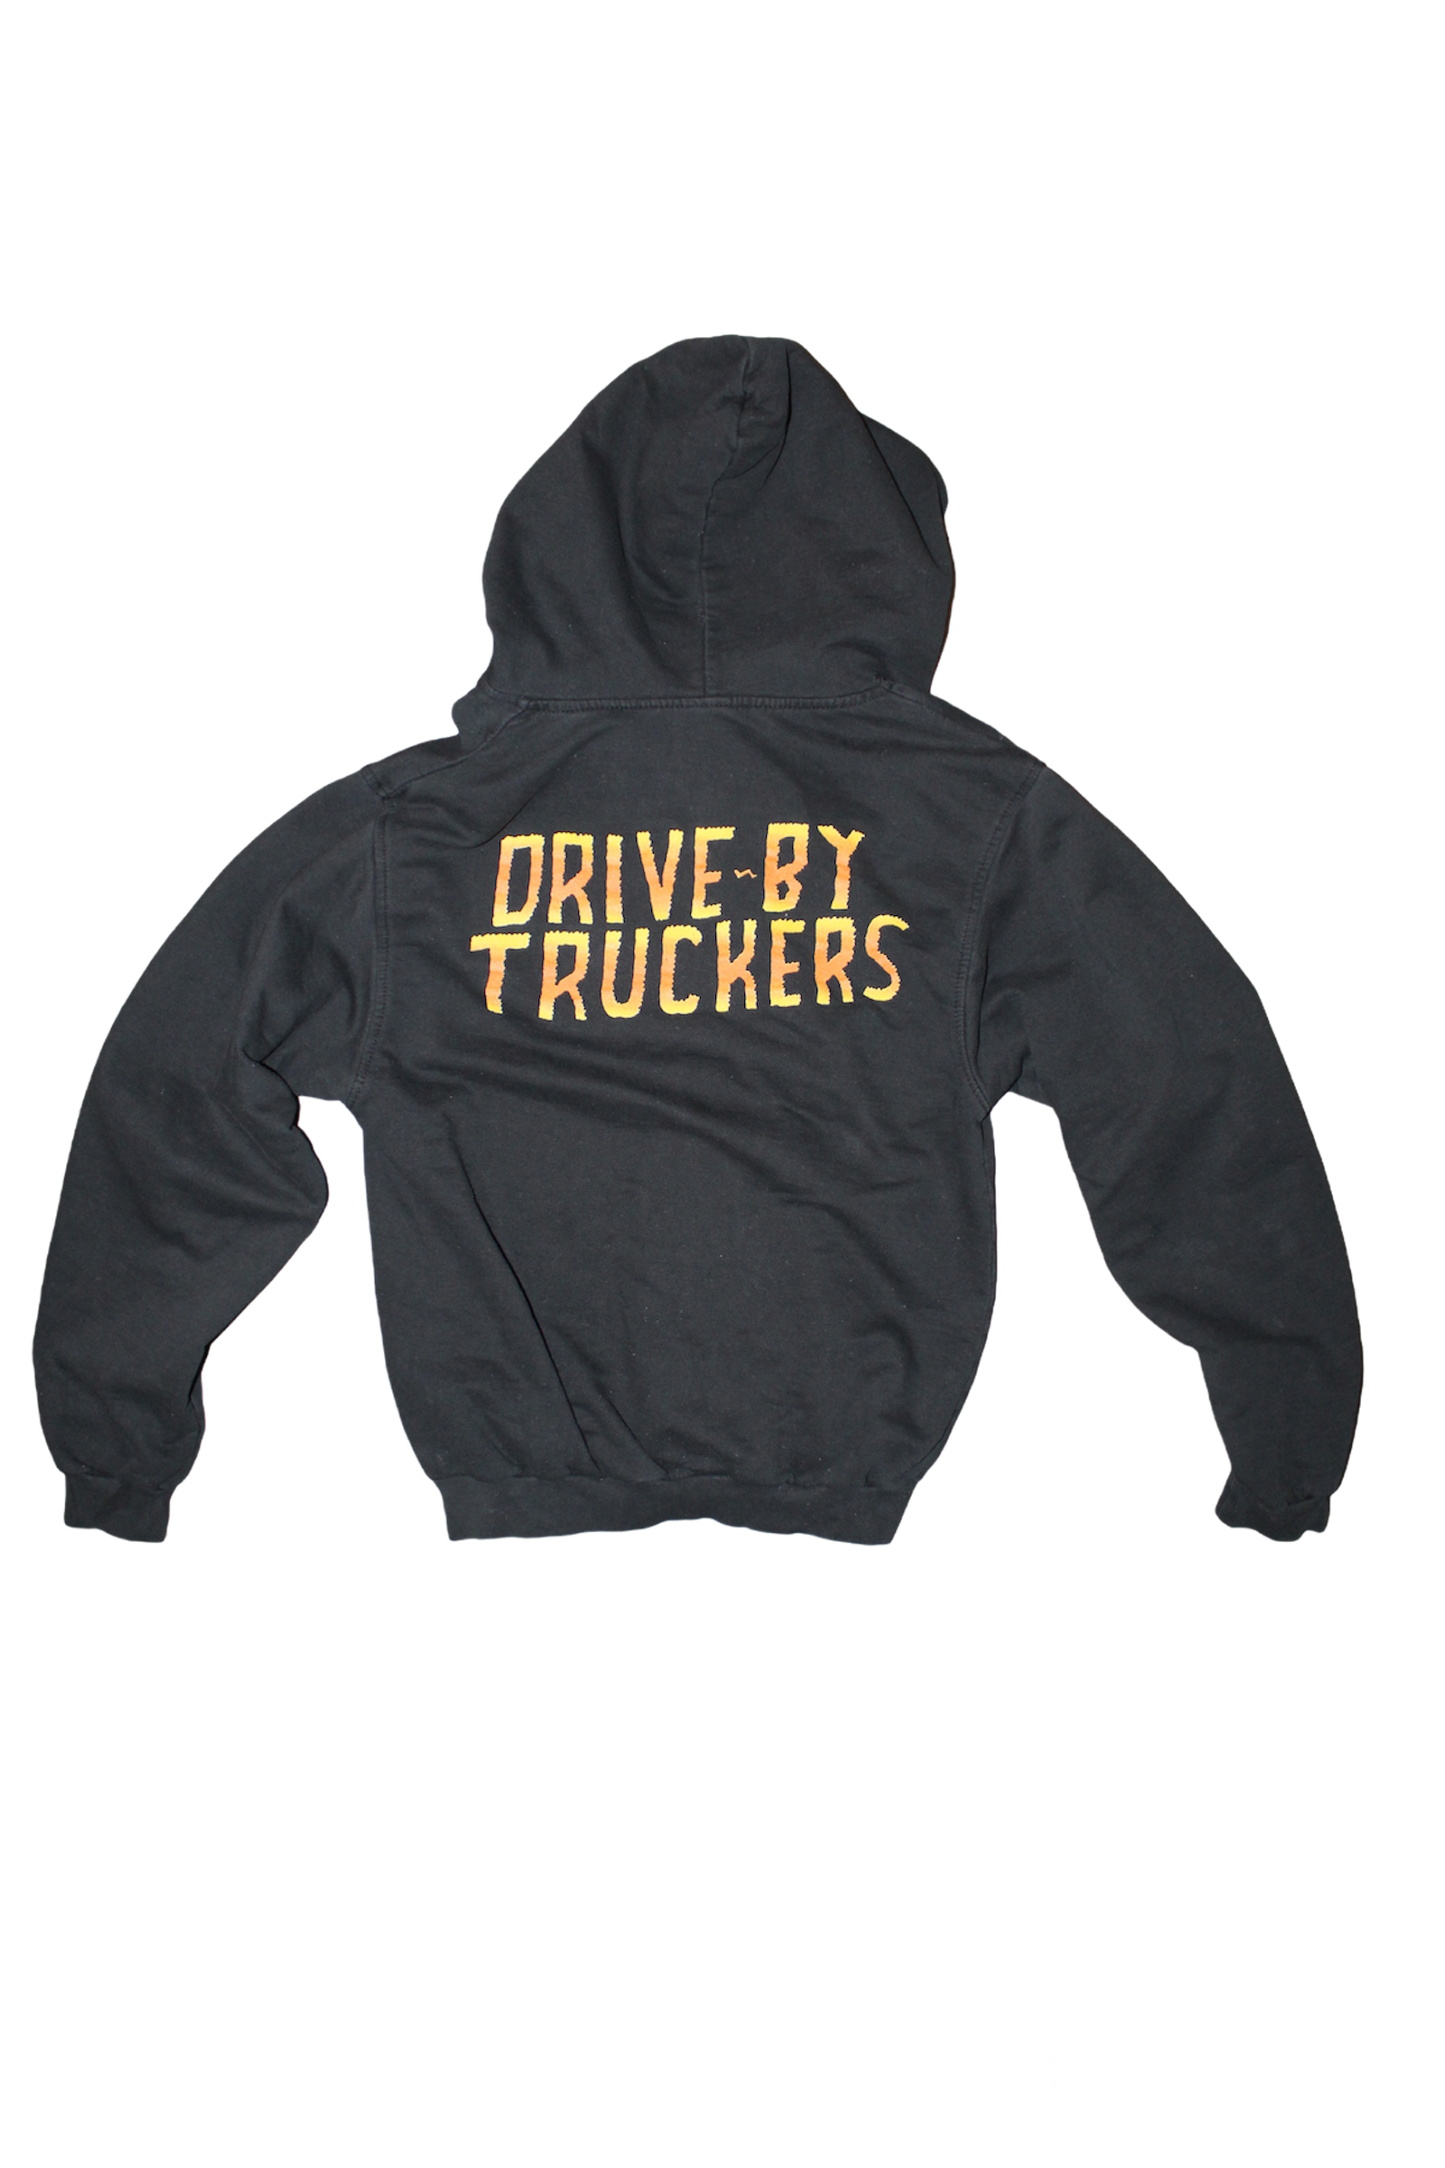 ‘Drive~By Truckers’ Zip Up